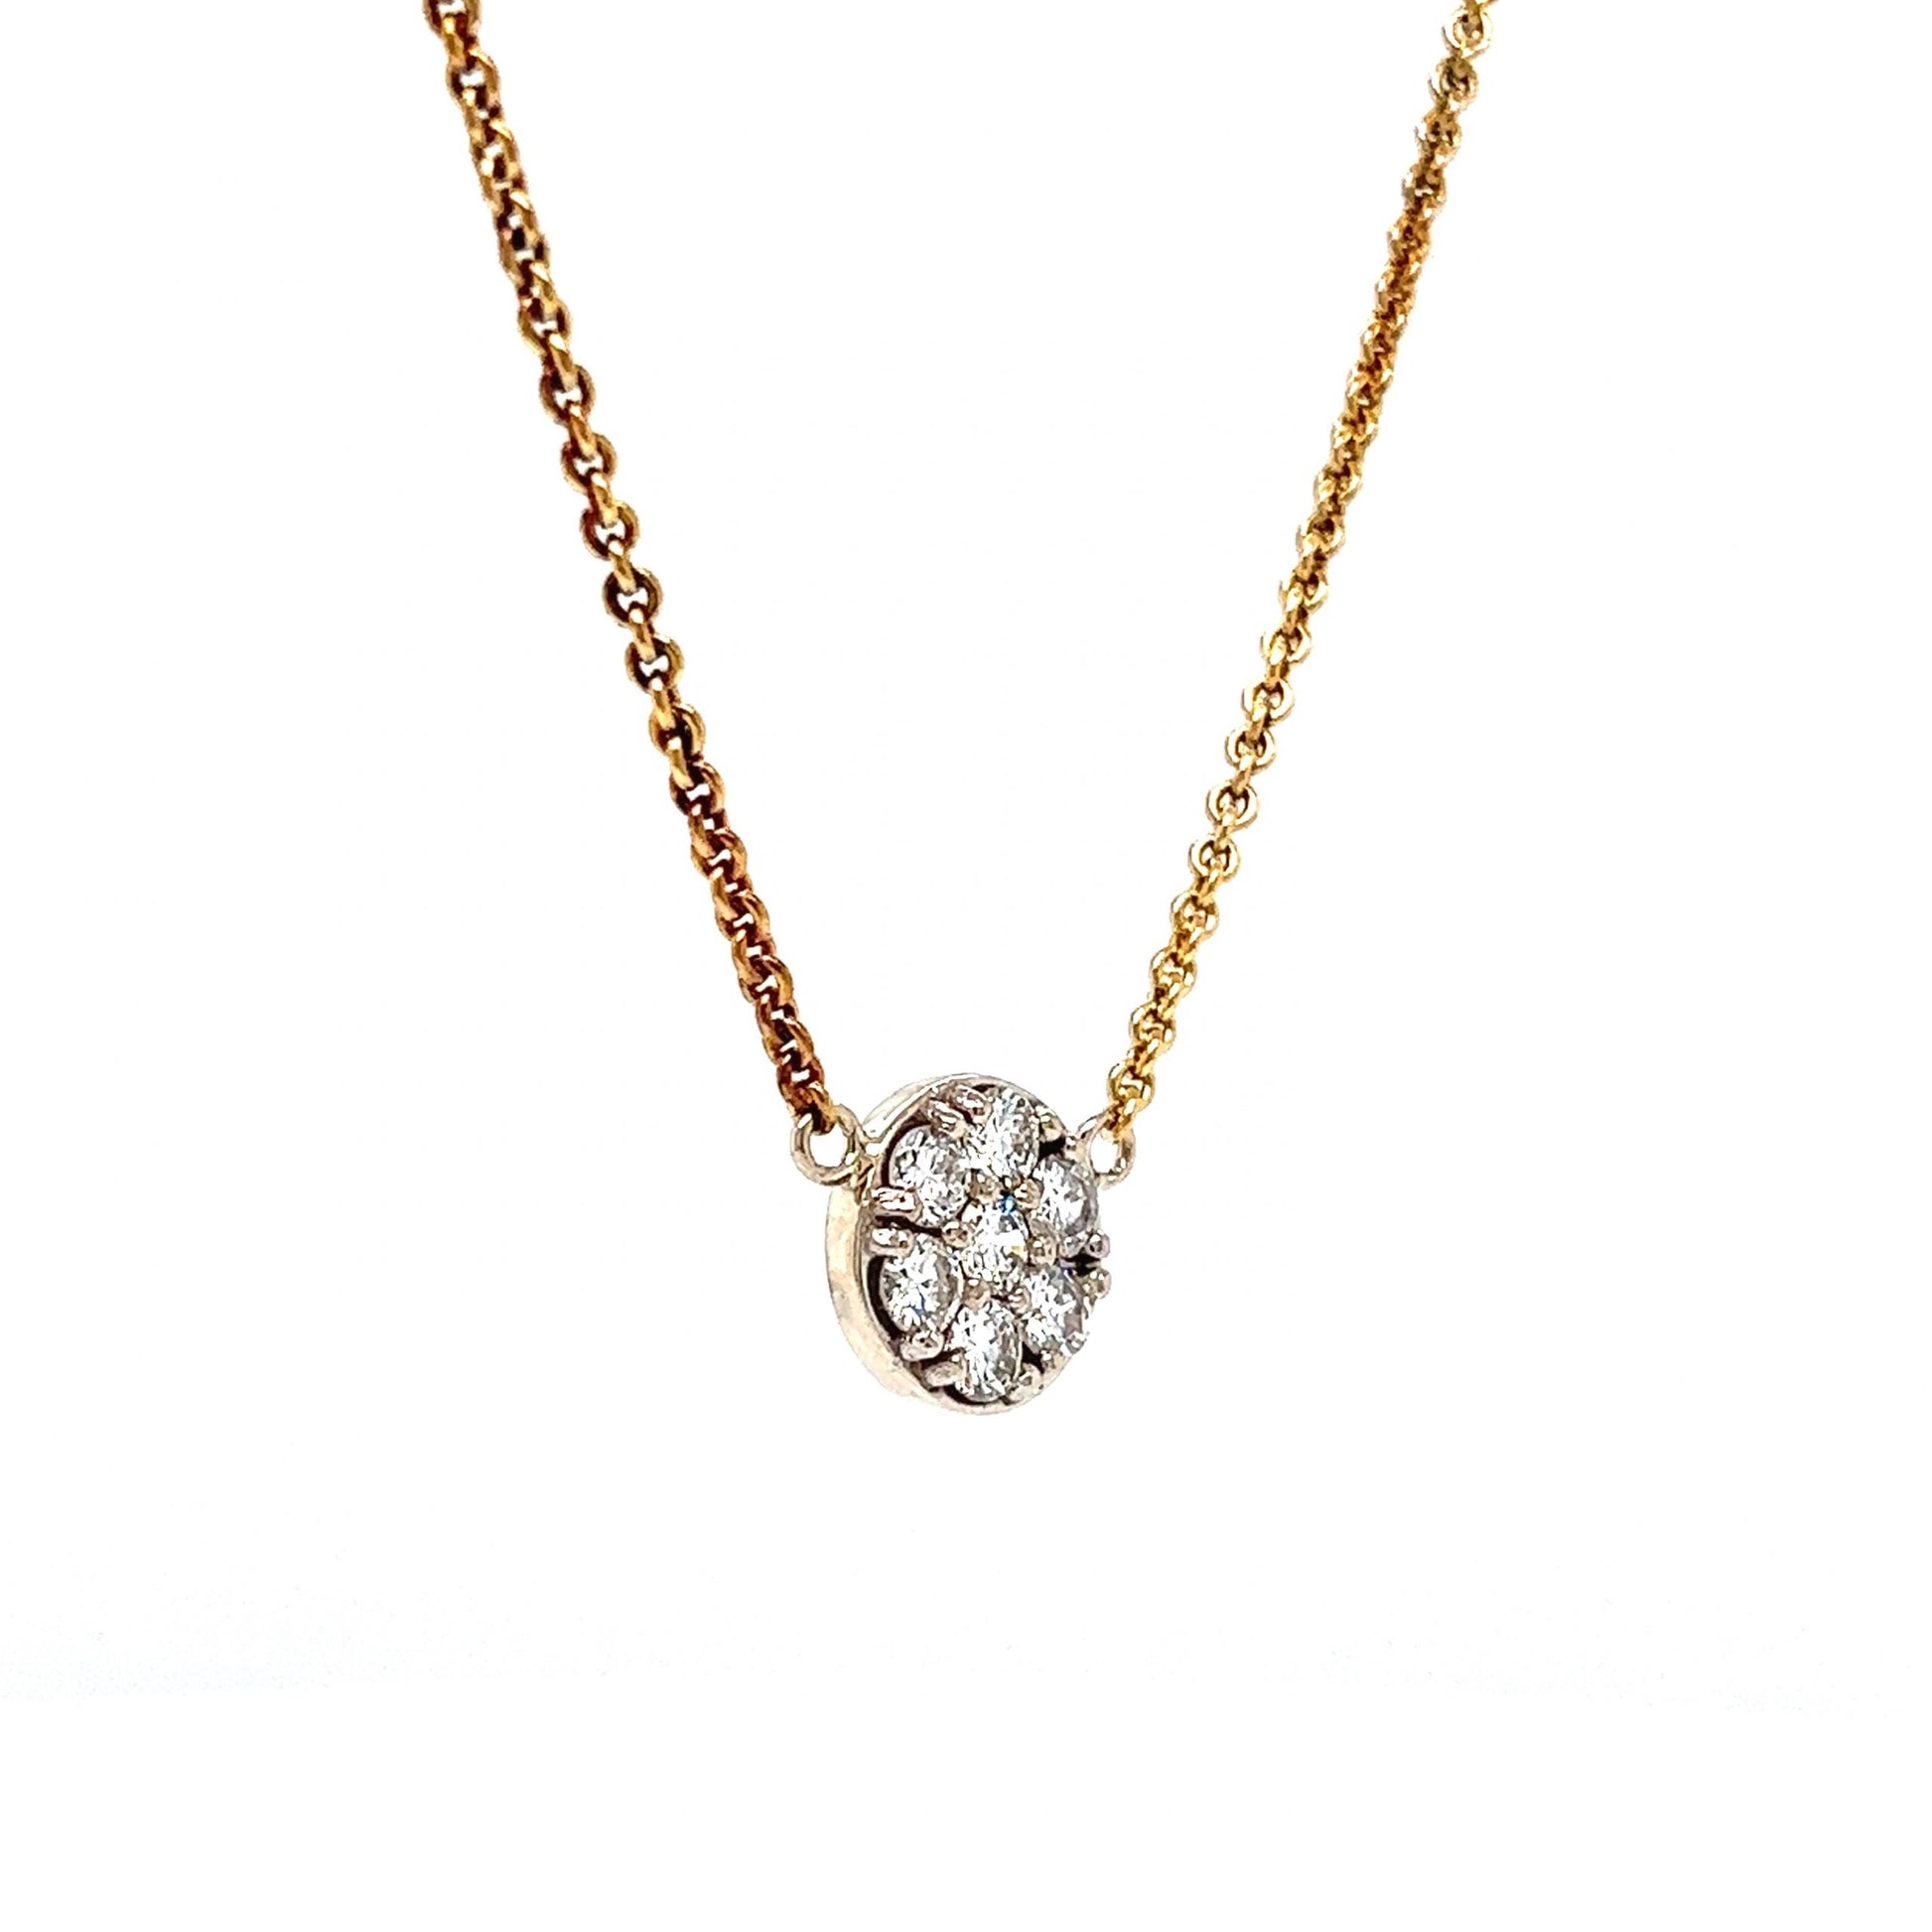 Modern Diamond Cluster Pendant Necklace in 14k Yellow Gold